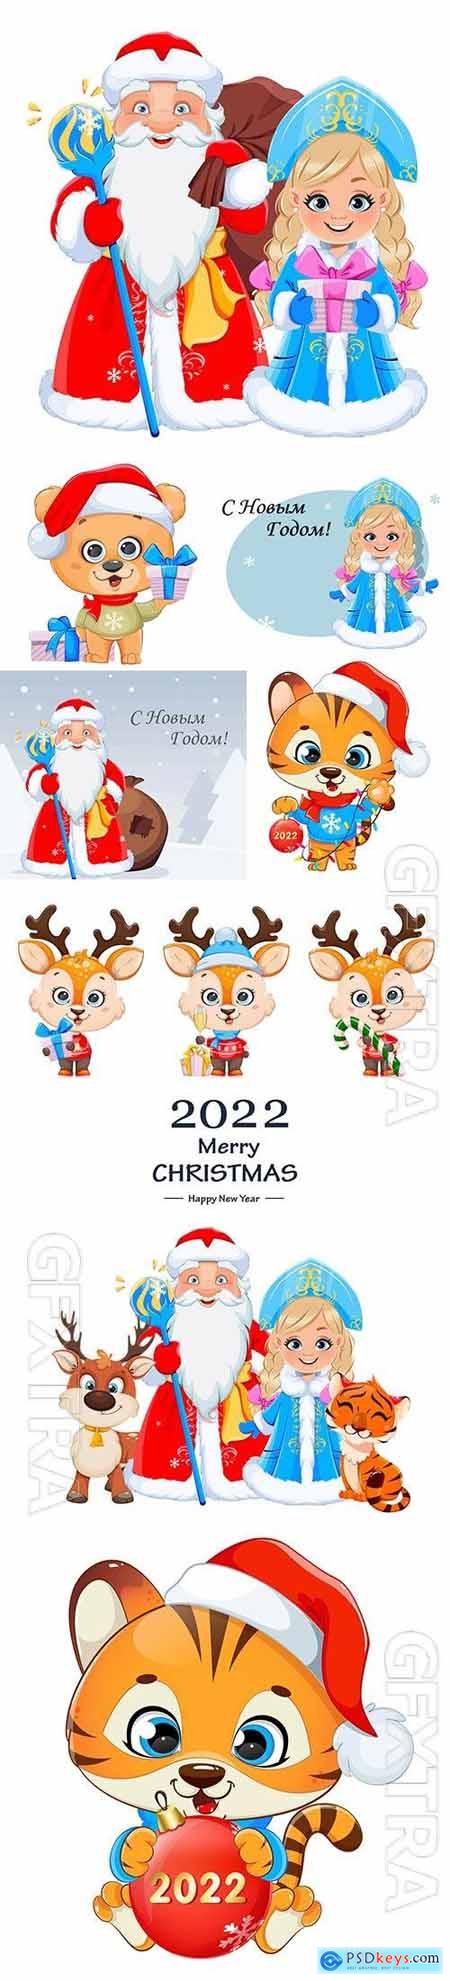 Happy new year and merry christmas russian father frost santa claus and snegurochka snow maiden vector